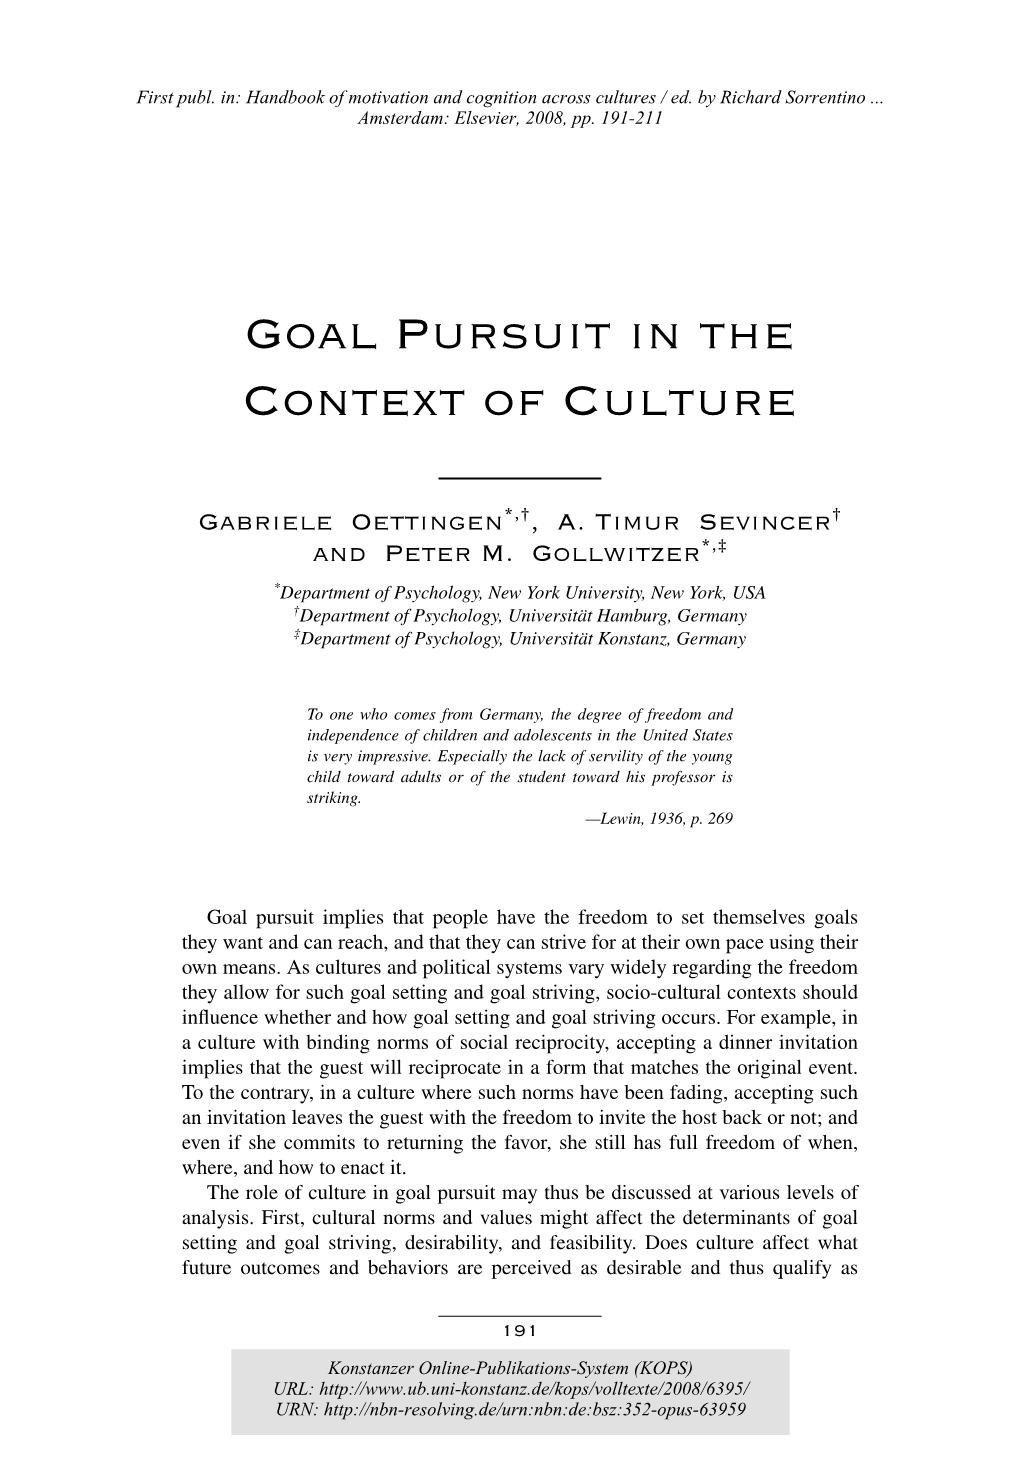 Goal Pursuit in the Context of Culture